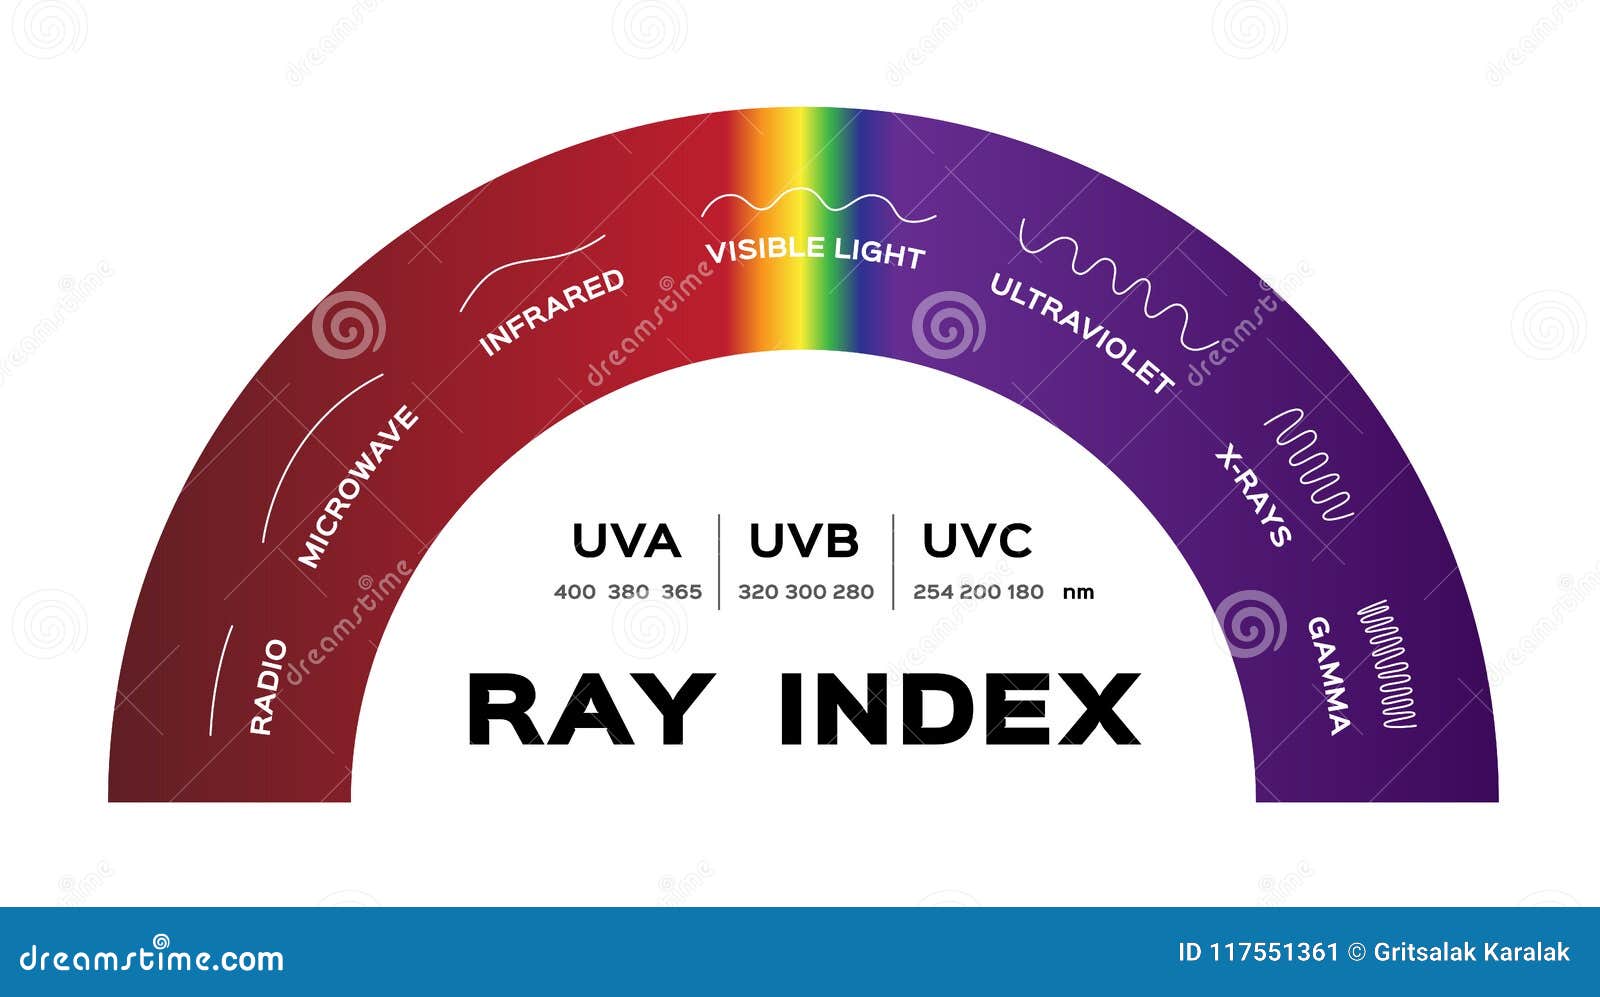 ray index infographic  . radio microwave infrared visible light ultraviolet x-rays and gamma